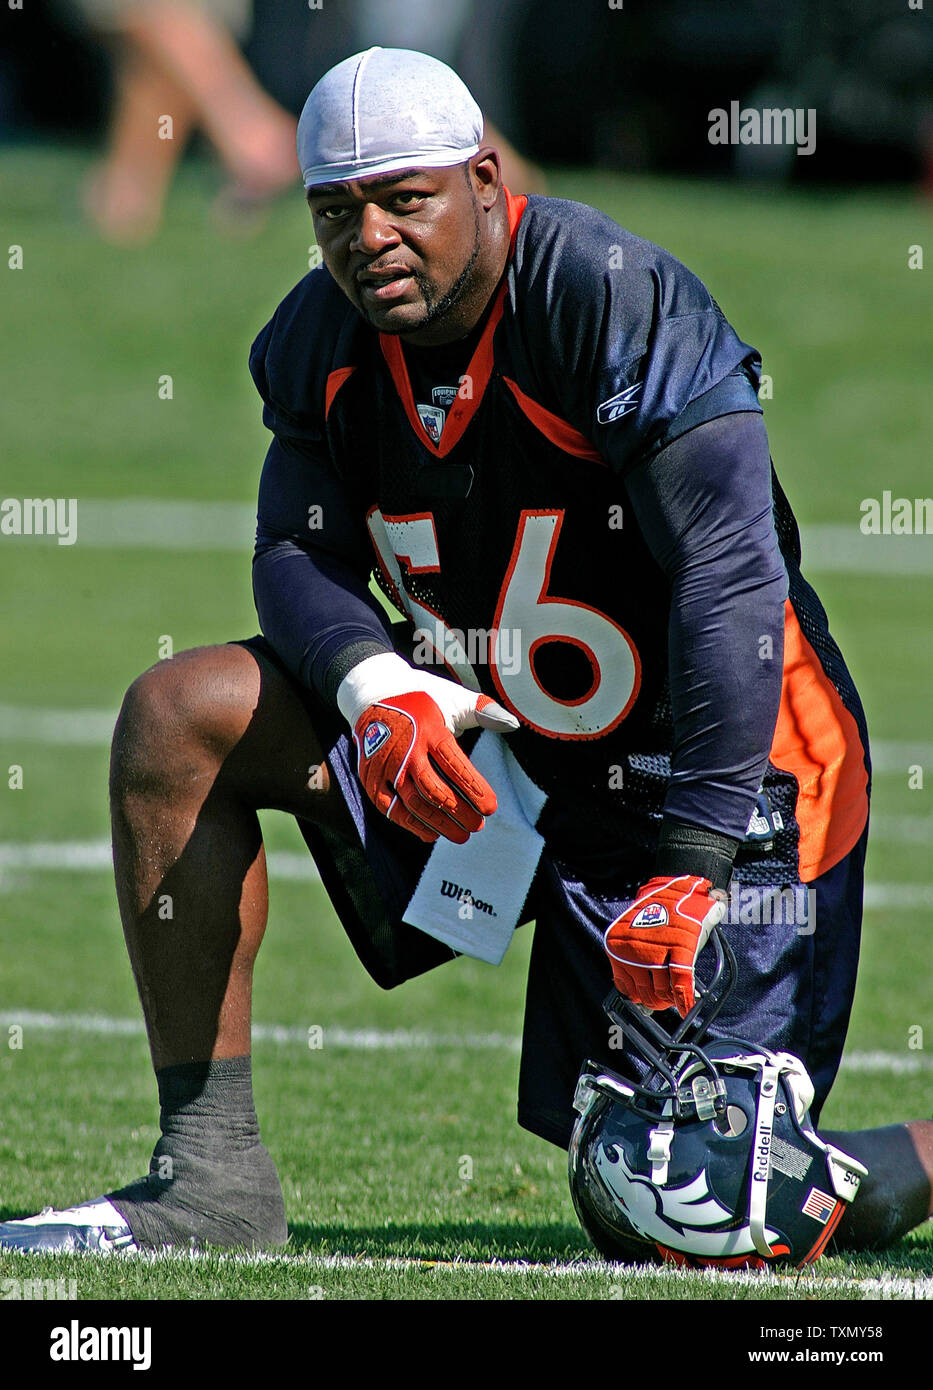 Denver Broncos linebacker, defensive leader, Al Wilson returns to the  Broncos defense as he rests between sets during first practice at Broncos  training camp in Englewood, Colorado July 28, 2006. (UPI Photo/Gary